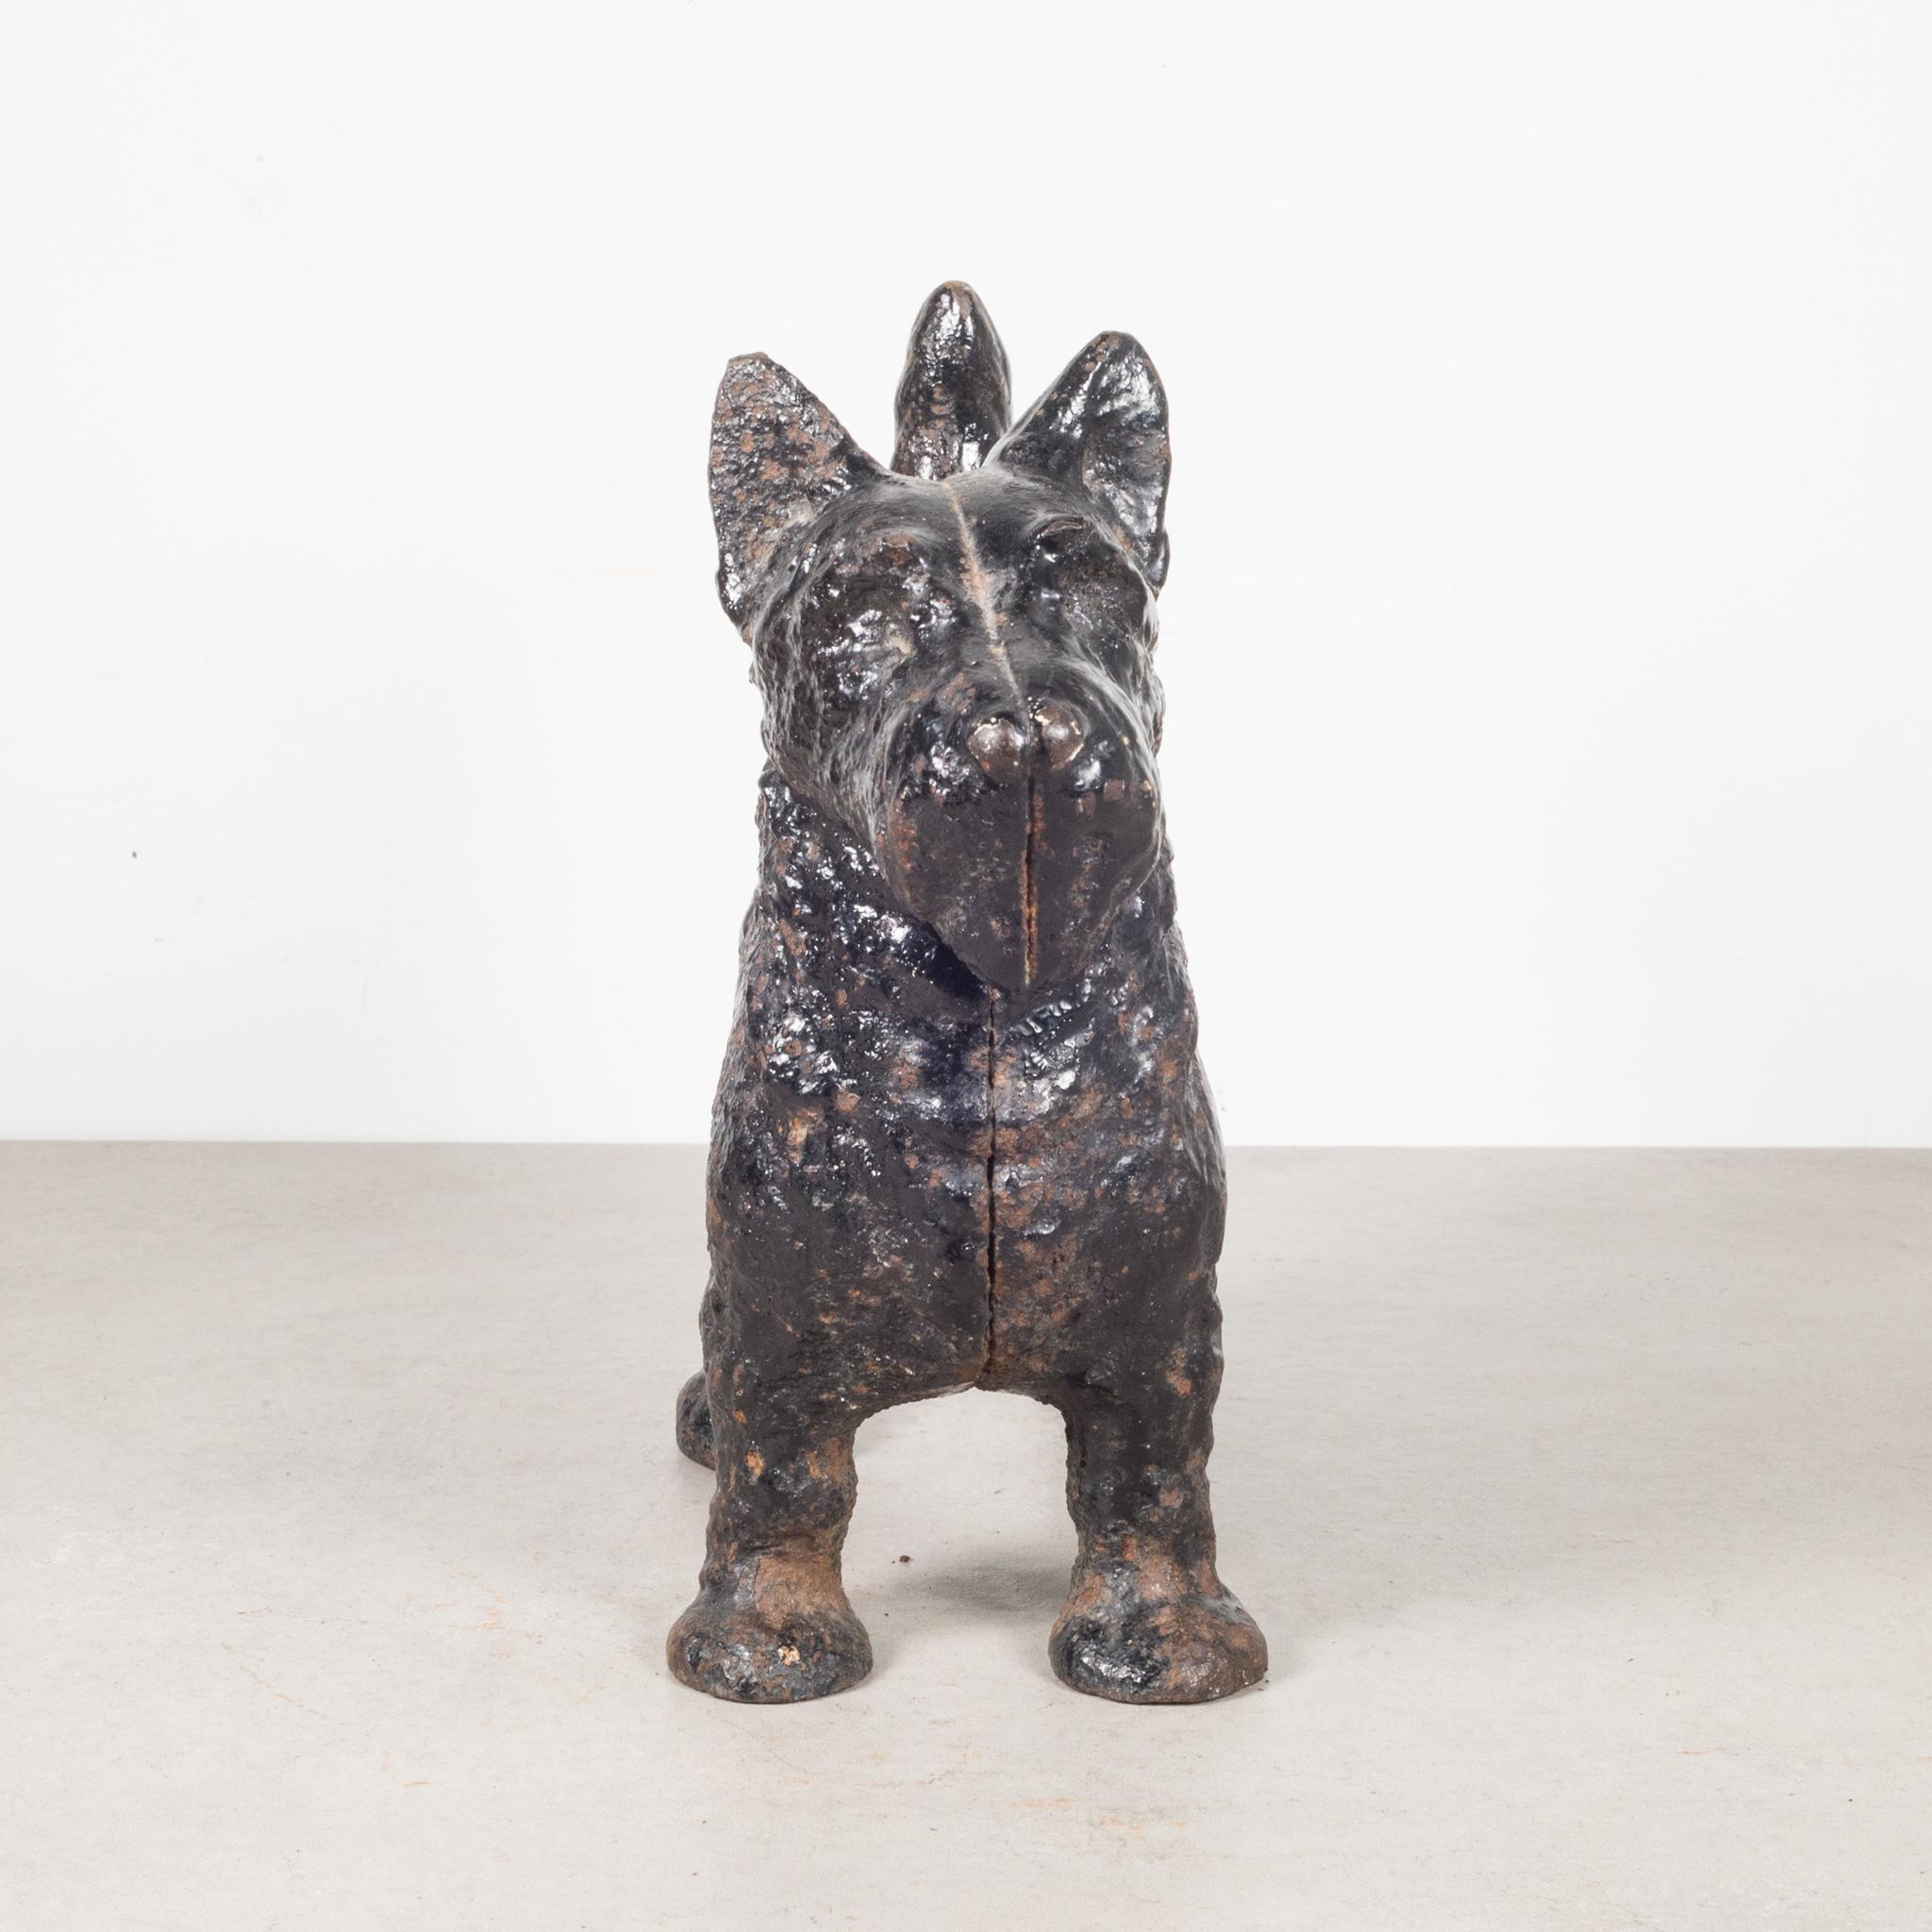 About

This is an original cast iron Scottish Terrier doorstop manufactured by the Hubley Manufacturing Company in Lancaster Pennsylvania USA. The piece has retained its original hand painted finish and is in good condition with the appropriate